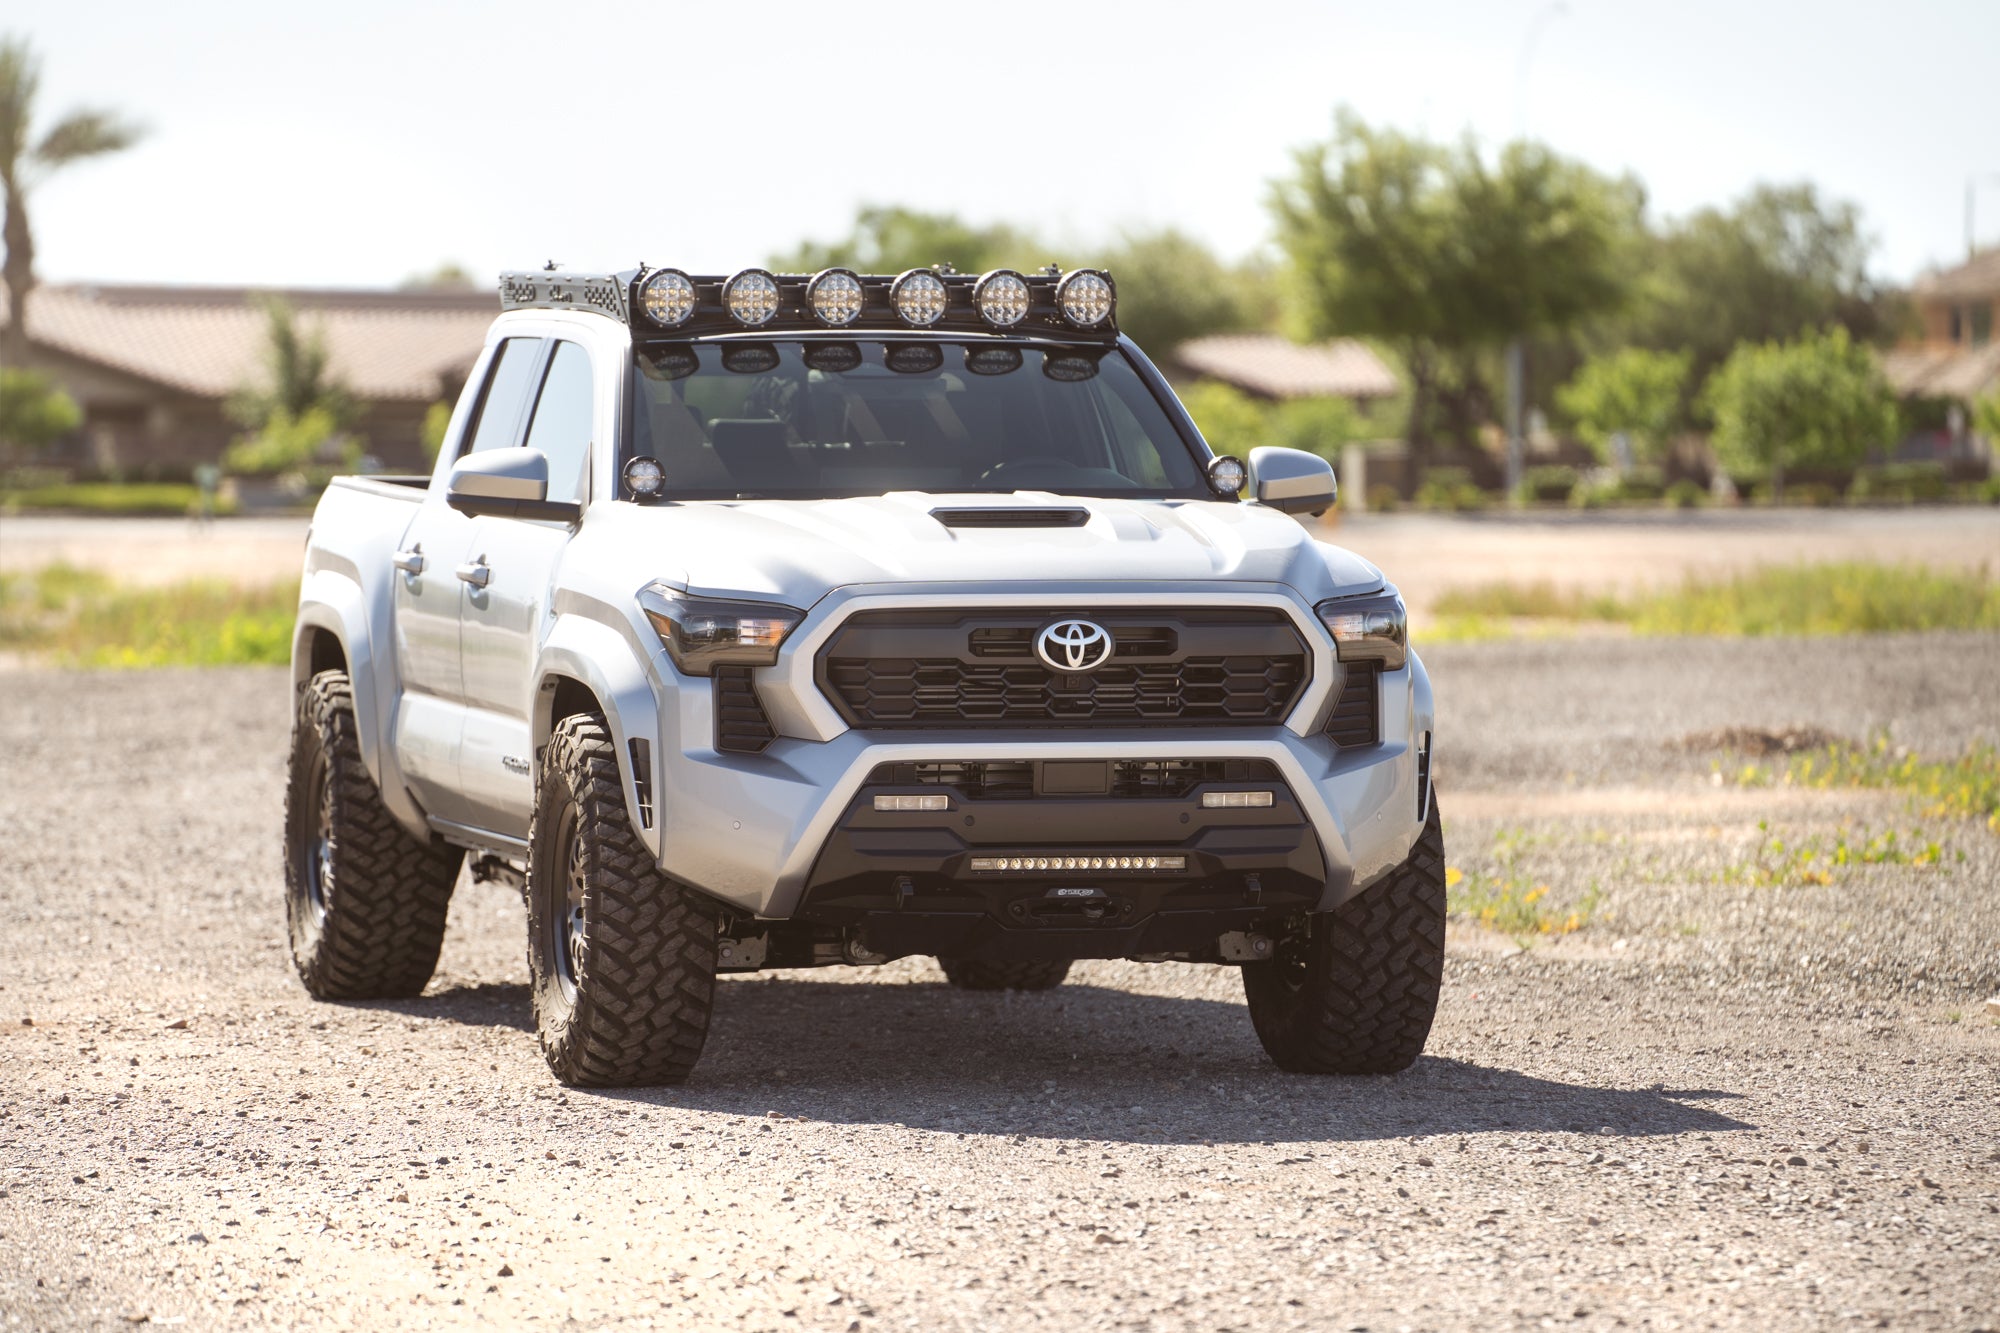 Ditch Light Brackets for the 4th Gen Toyota Tacoma off road